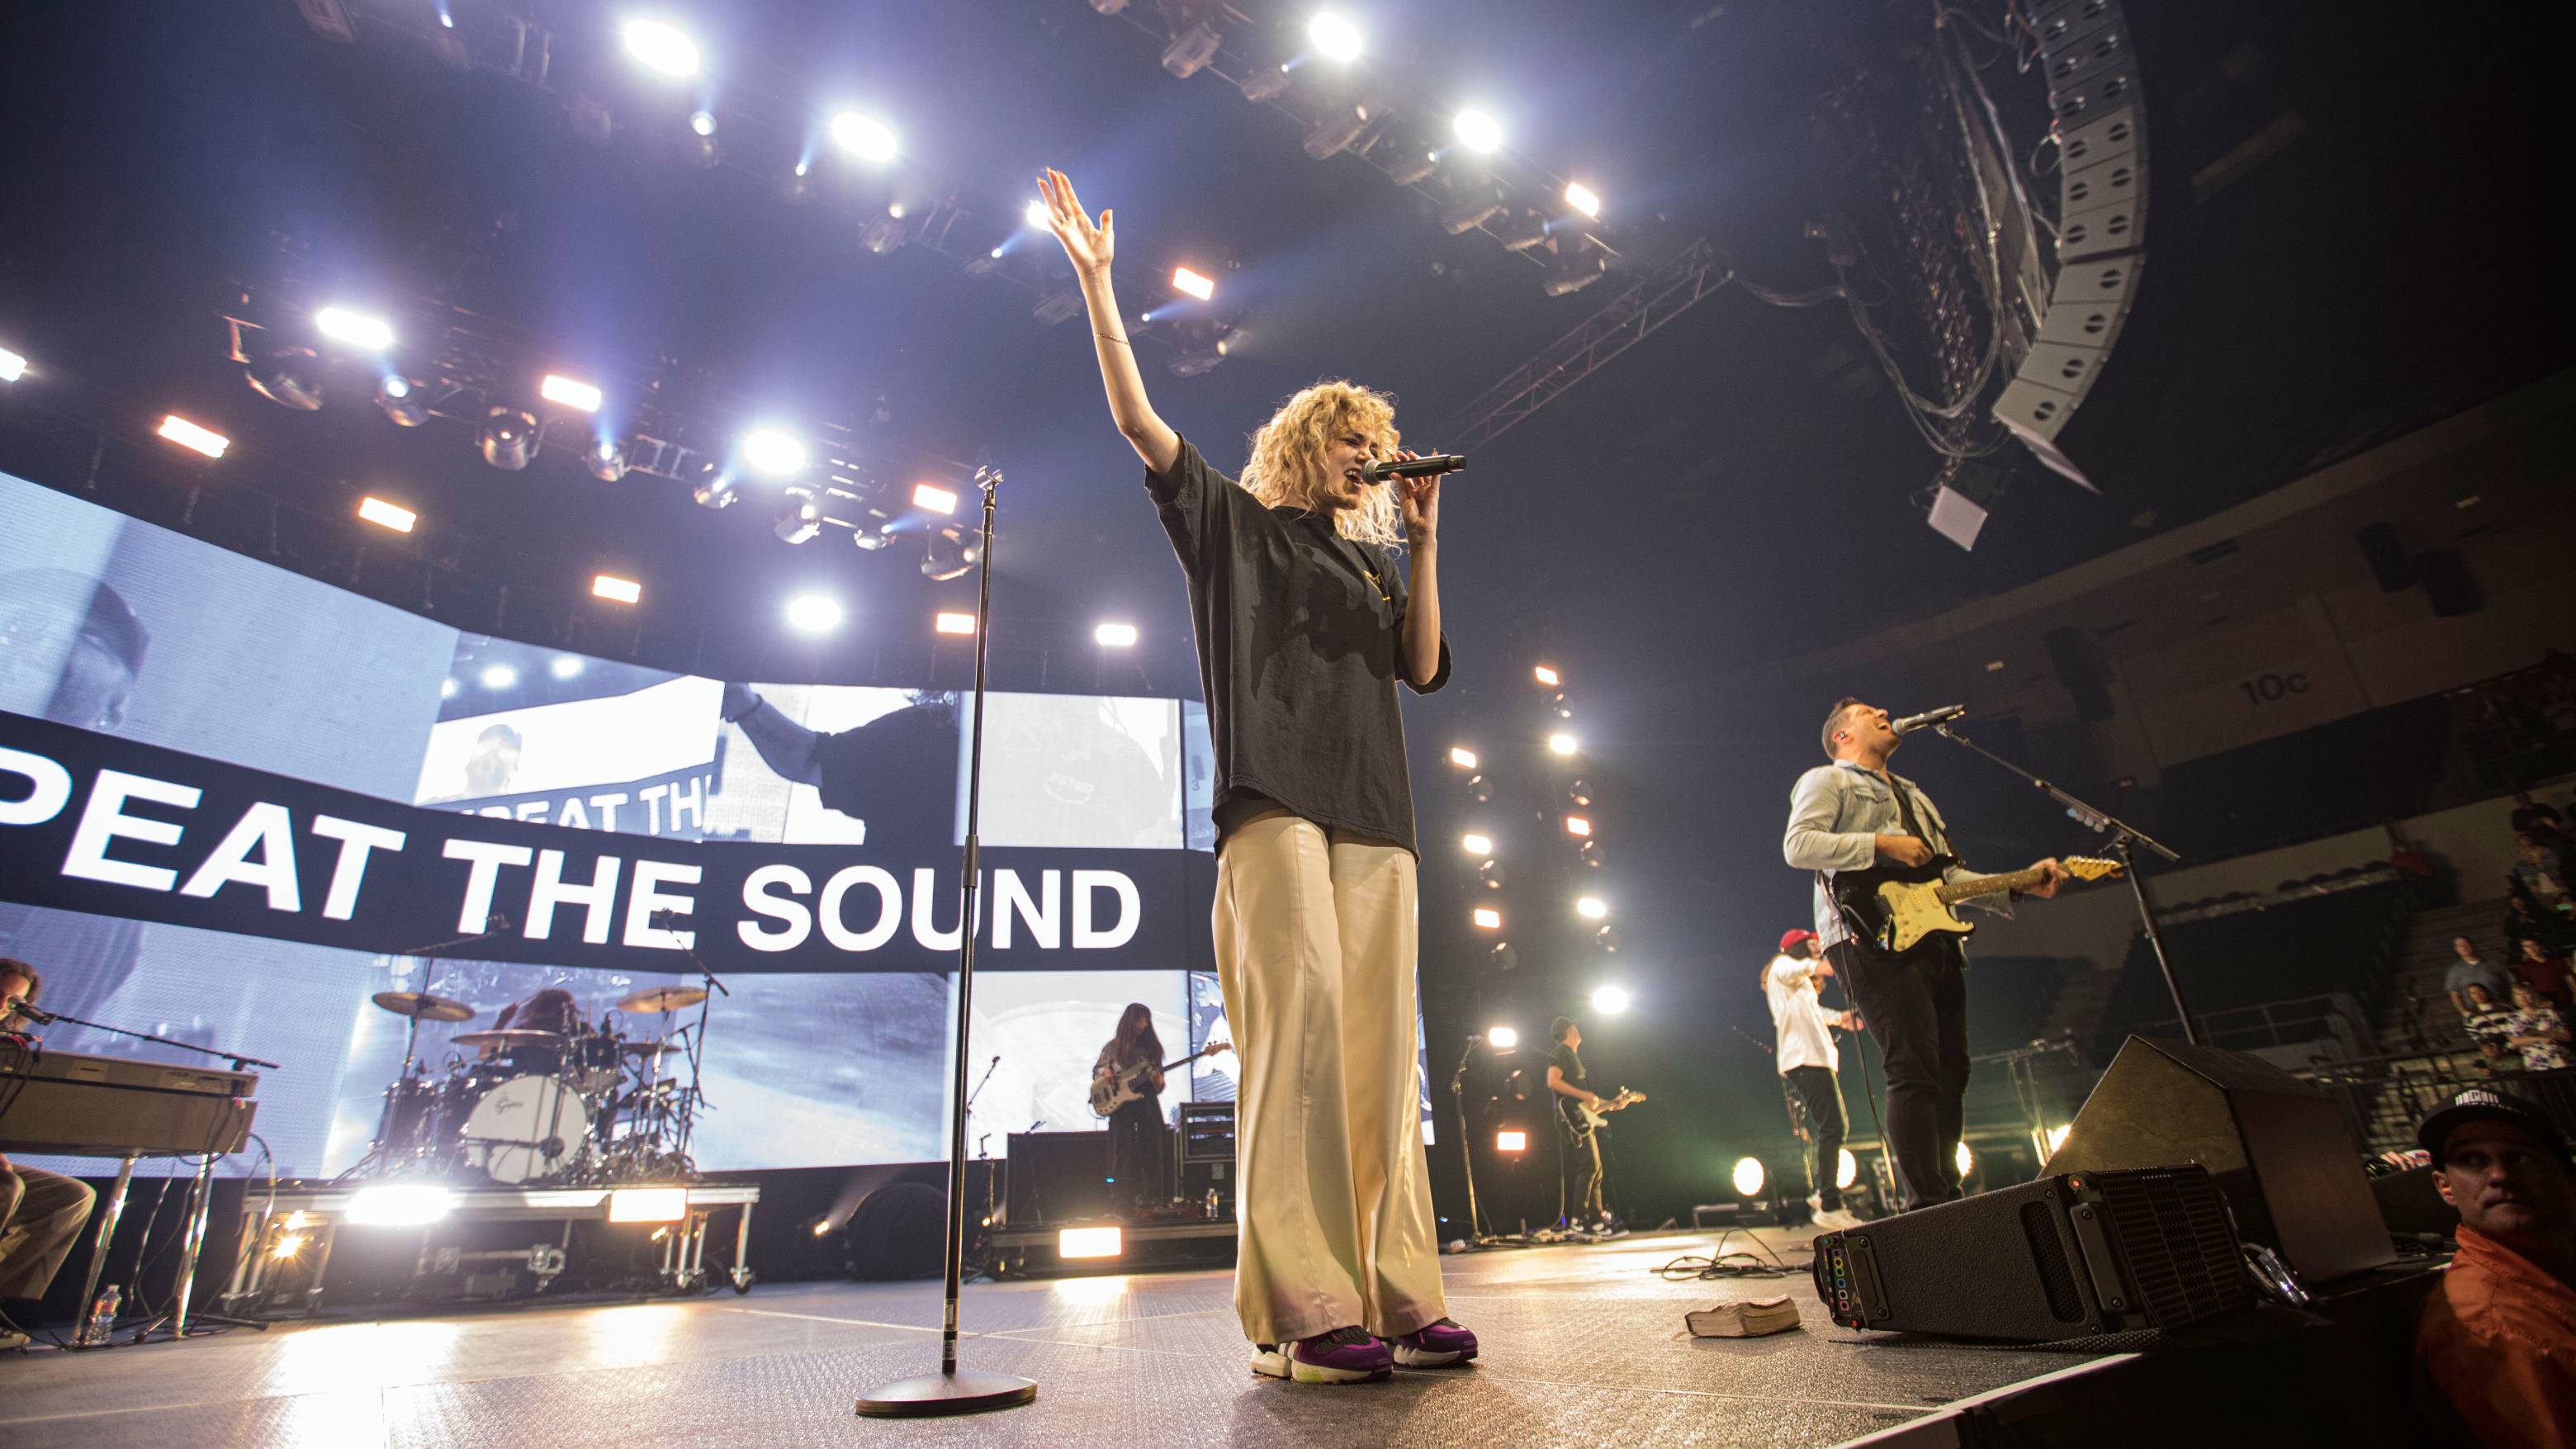 Hillsong Worship Team Is Dropping Out of Tour in the Wake of